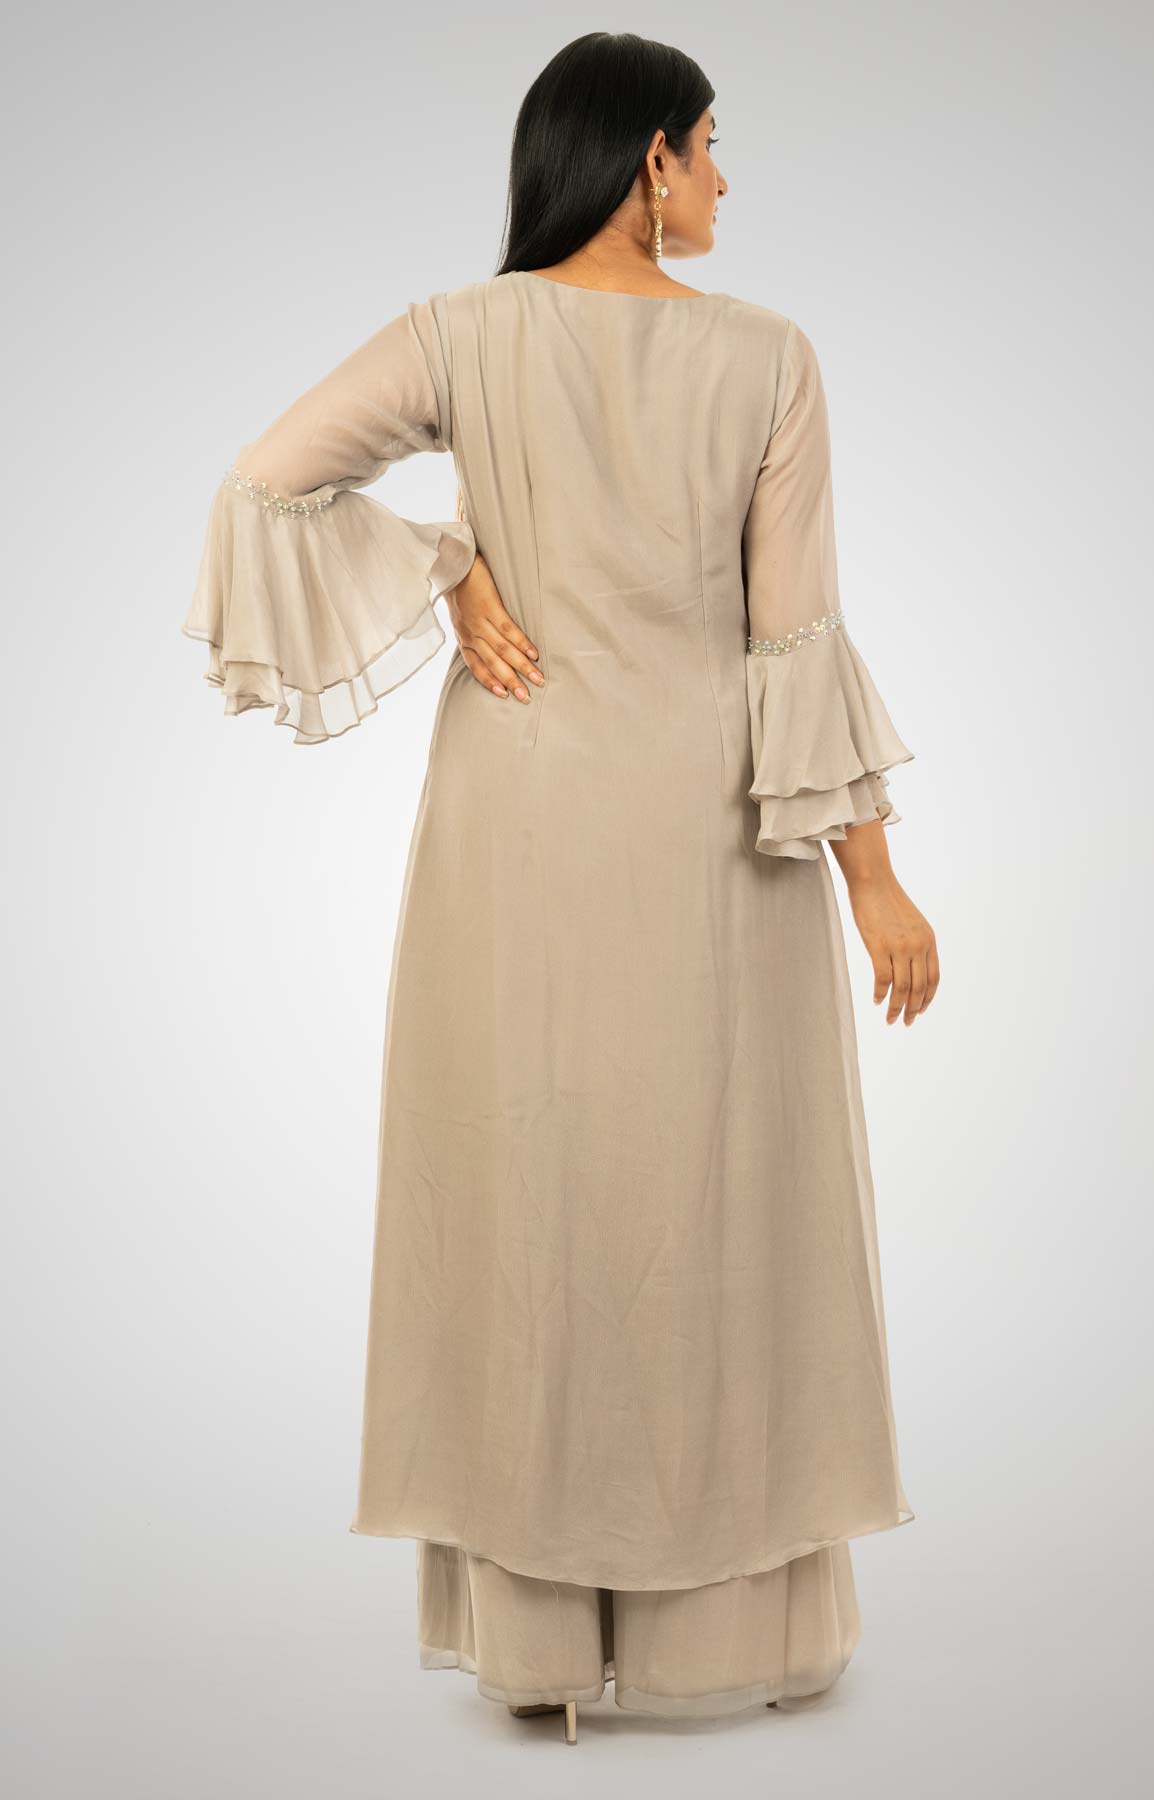 Glided Beige Crepe Palazzo Suit With A-Symmetrical A-line Kurta Adorned With Moti And Bead Work – Viraaya By Ushnakmals